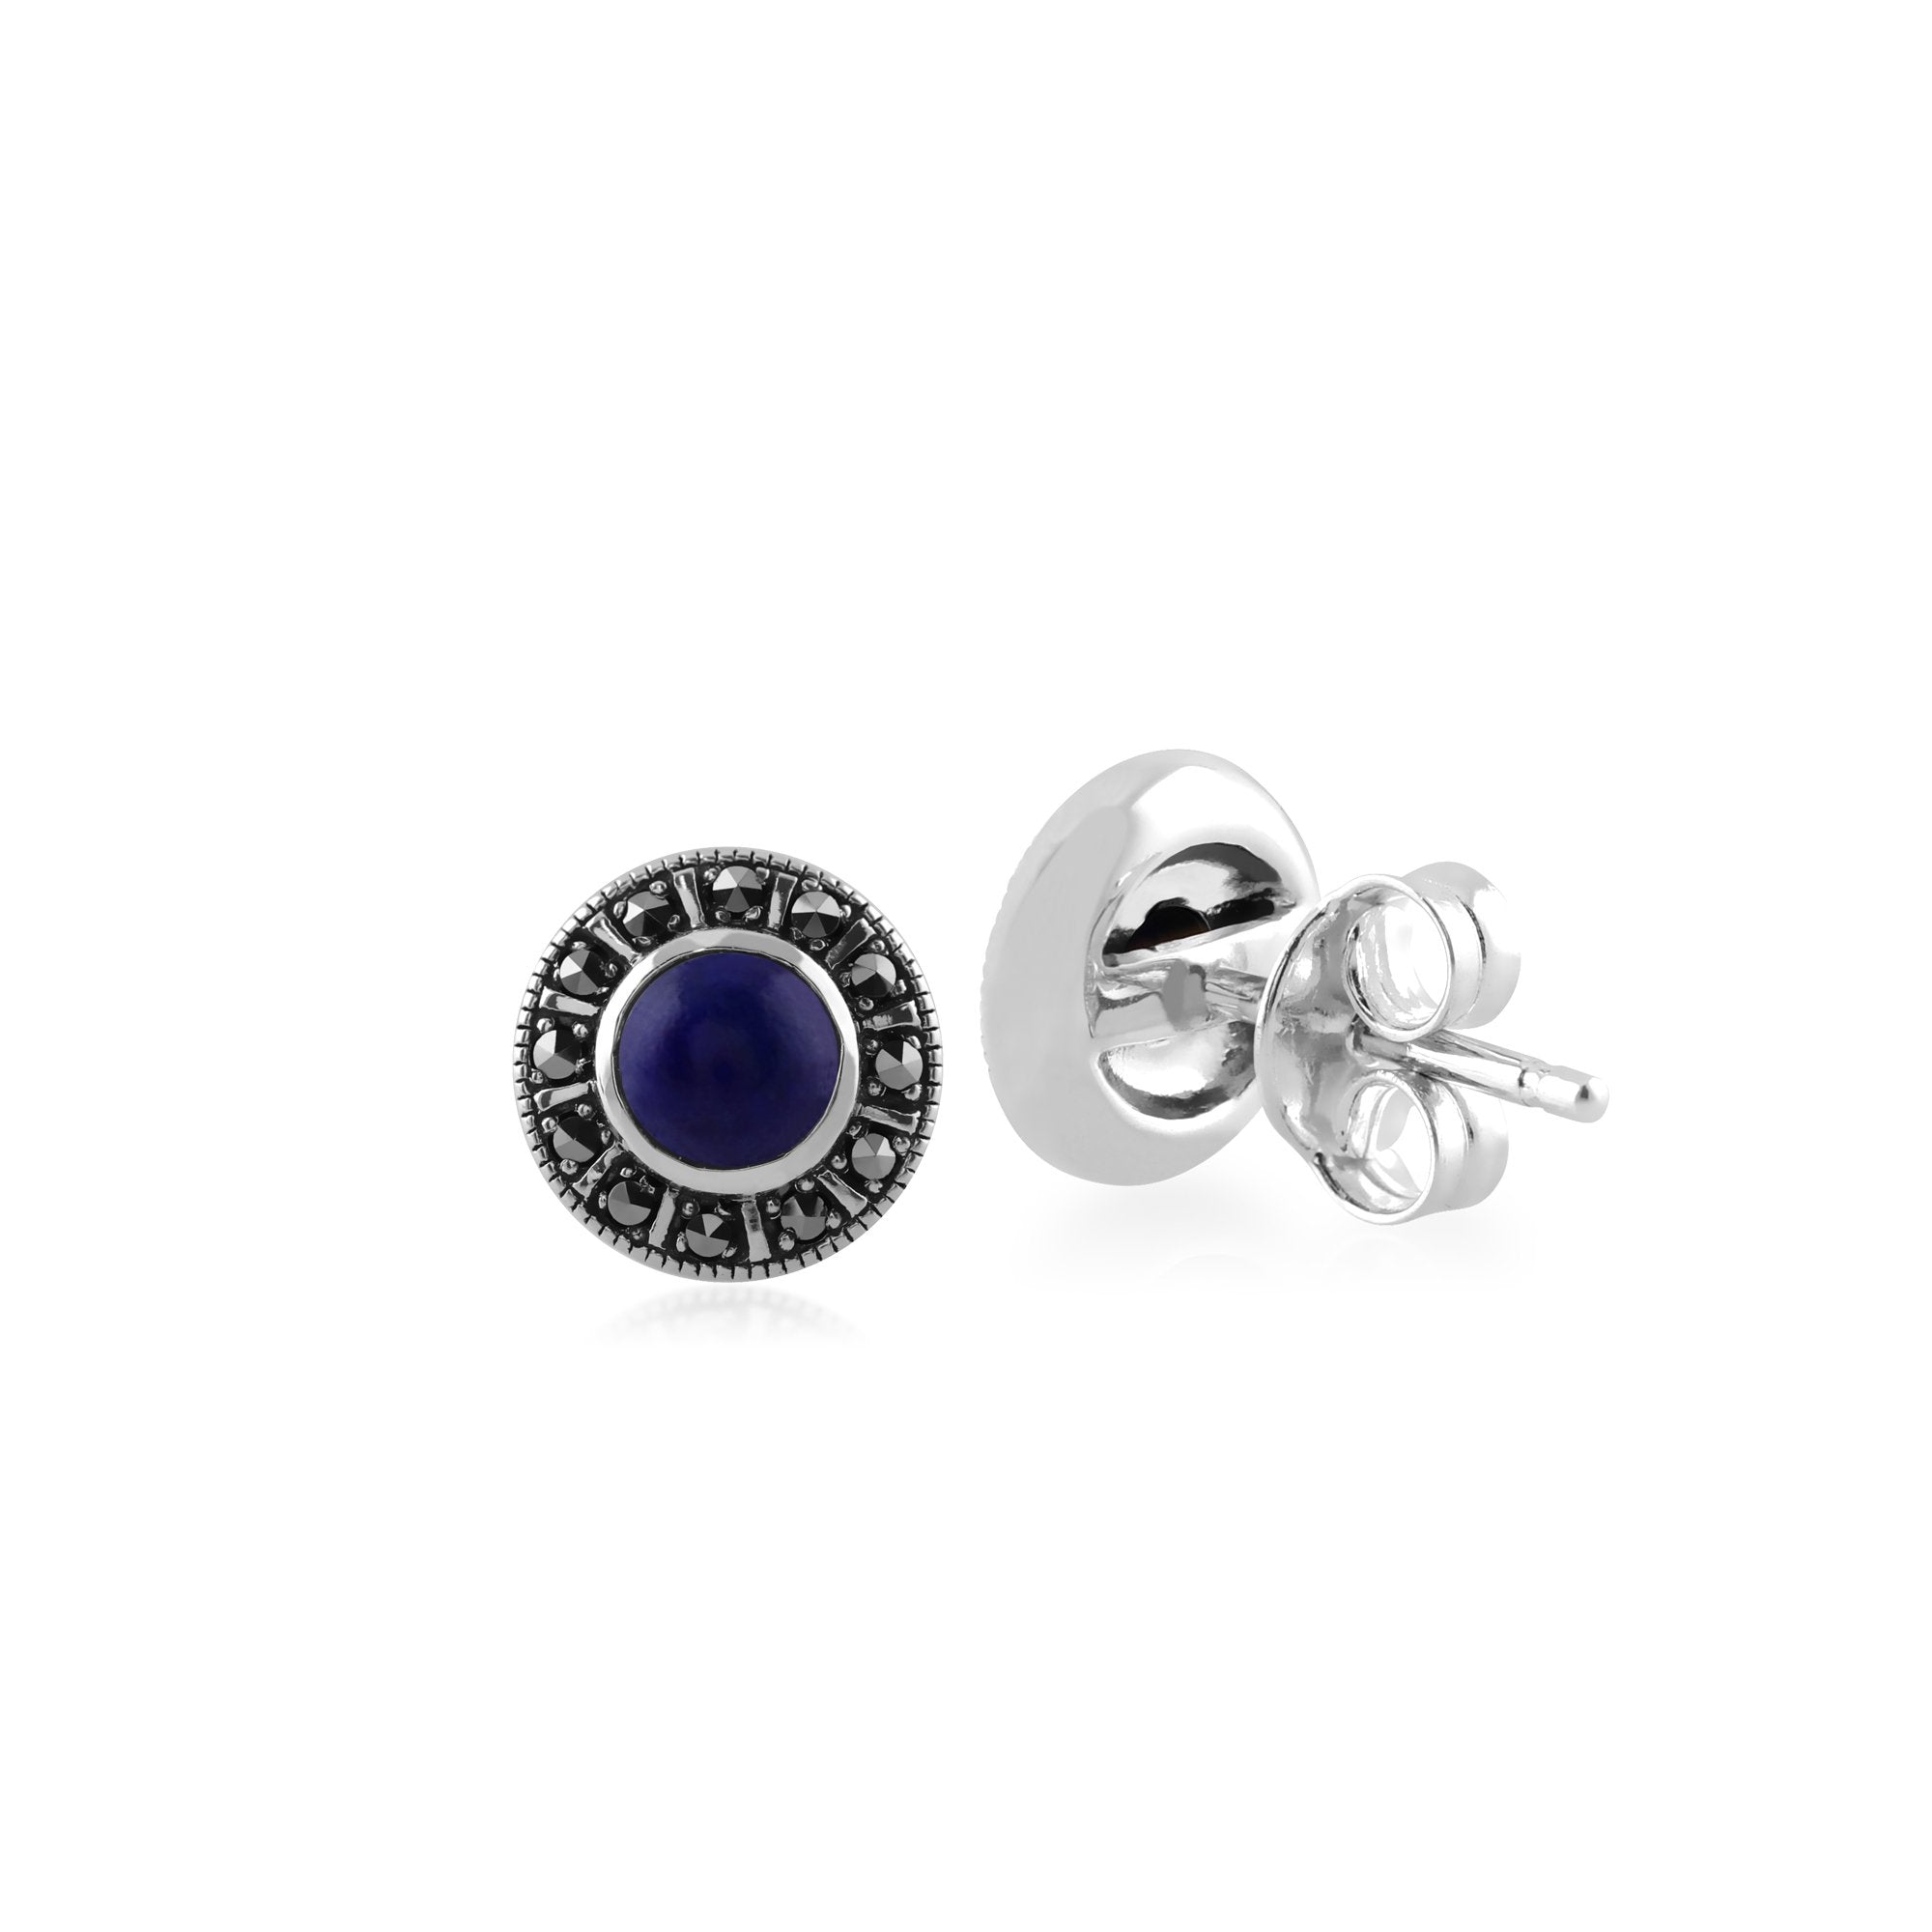 Art Deco Style Round Lapis Lazuli & Marcasite Halo Stud Earrings in 925 Sterling Silver